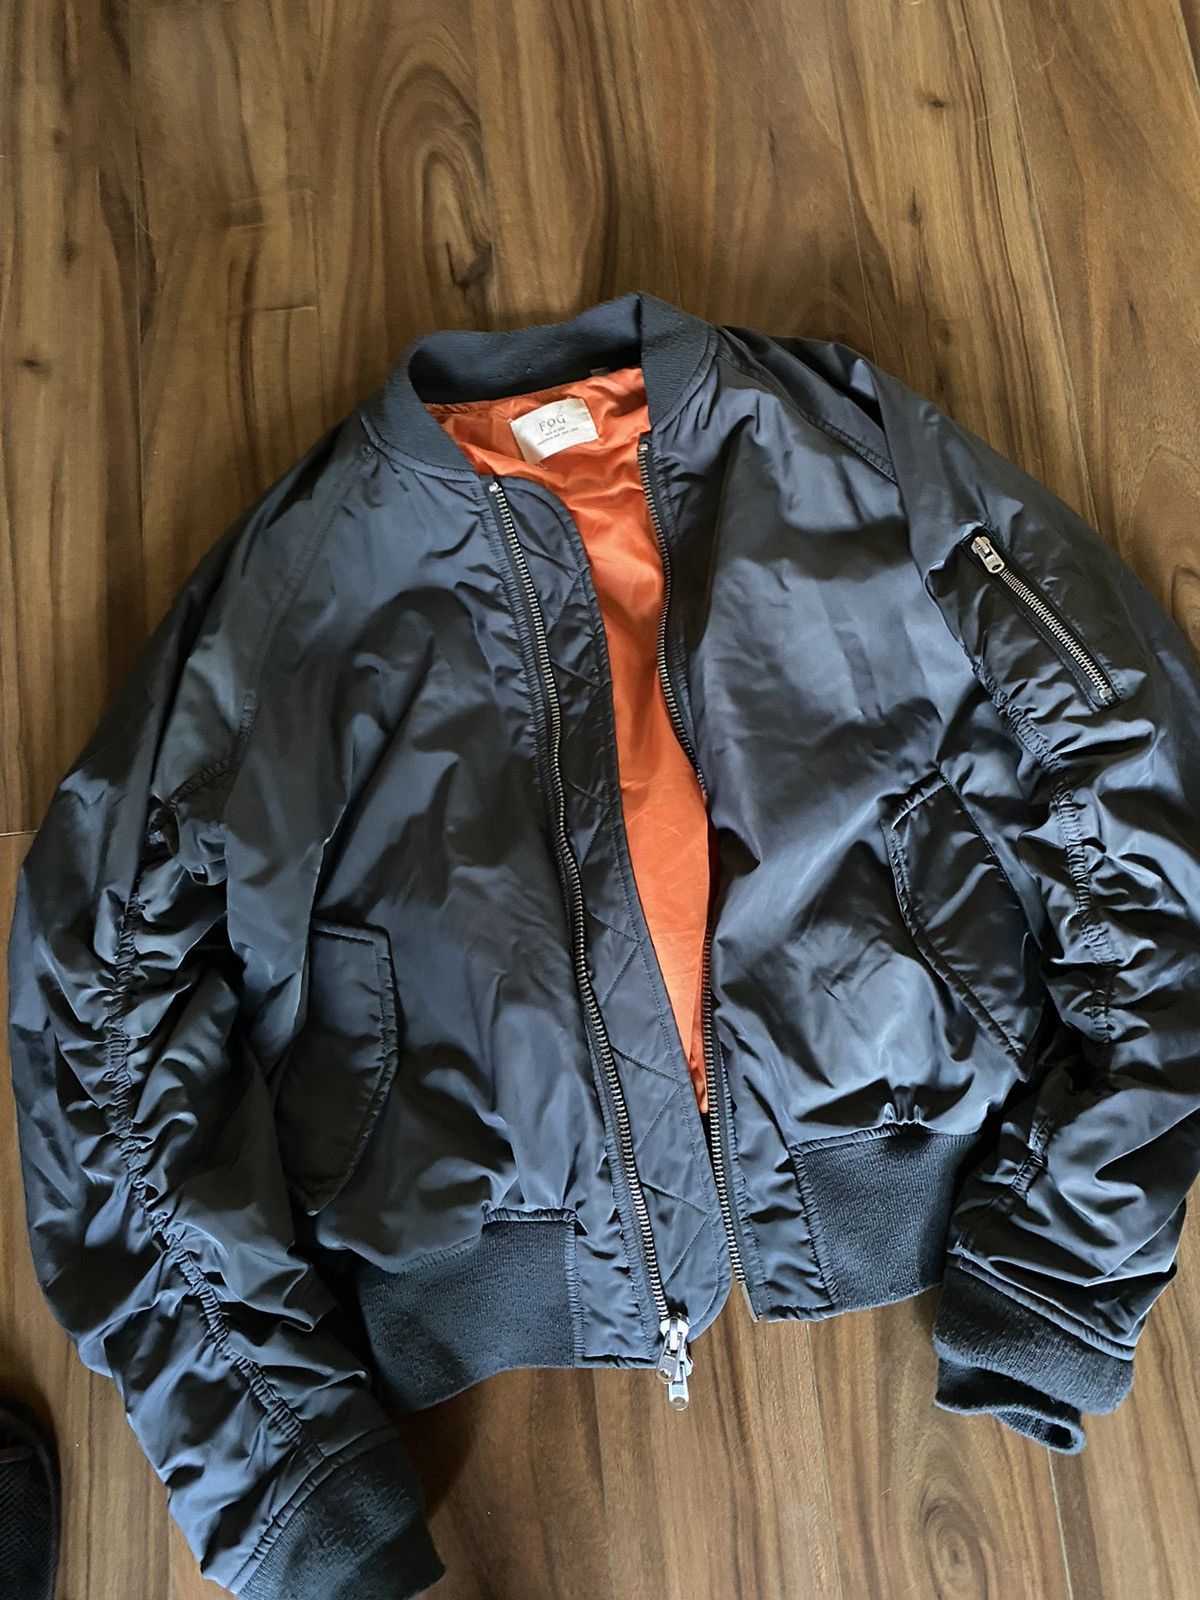 Pacsun FOG x Pacsun Collection One 2015-2016 Bomber Jacket